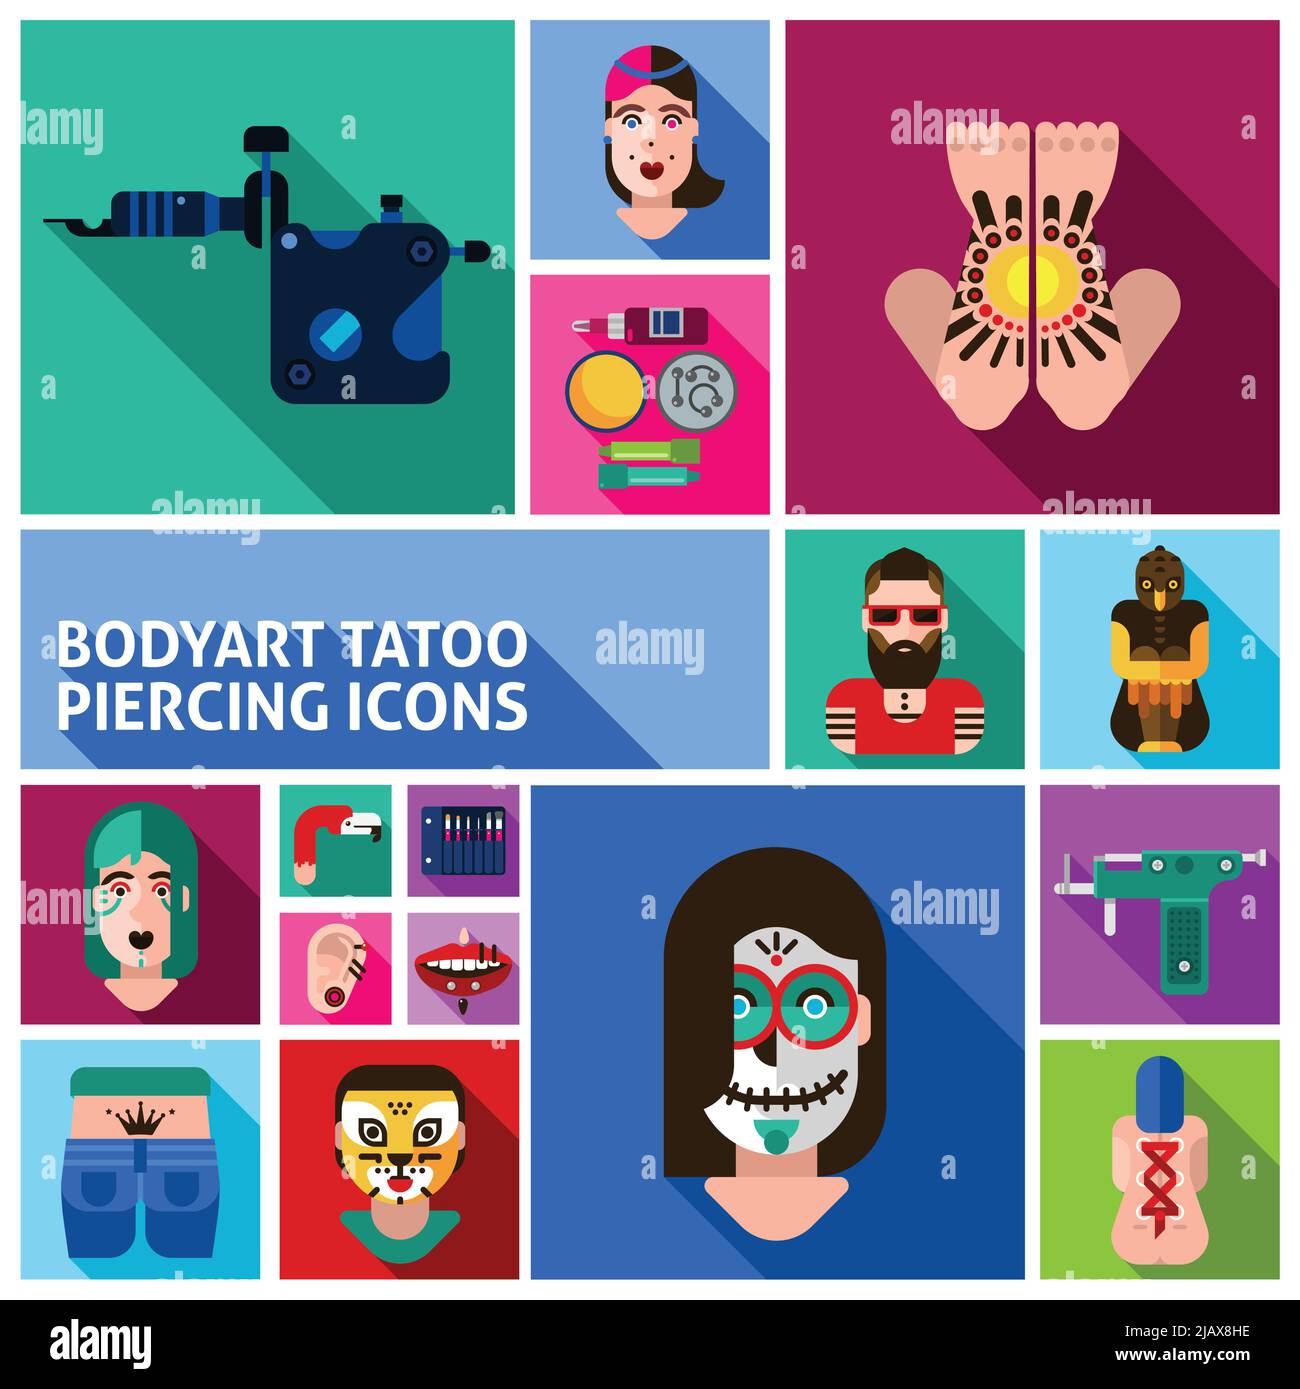 Square images and icons set of tattoo piercing and bodyart drawn in flat style isolated vector illustration Stock Vector